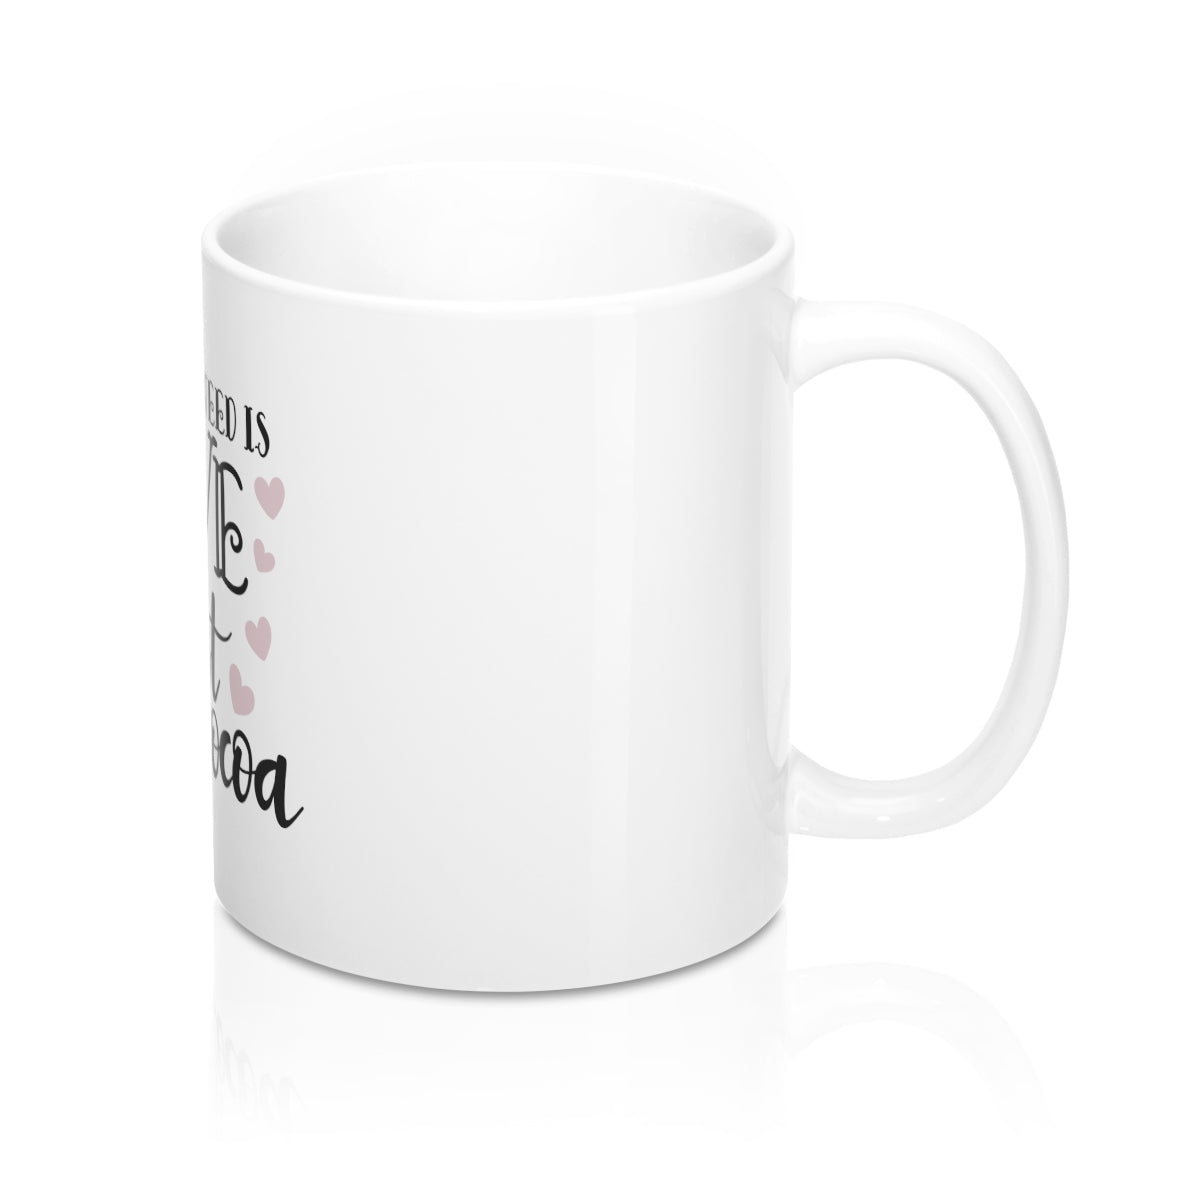 All You Need Is Love And Hot Cocoa 11oz Ceramic Mug - Inspired By Savy